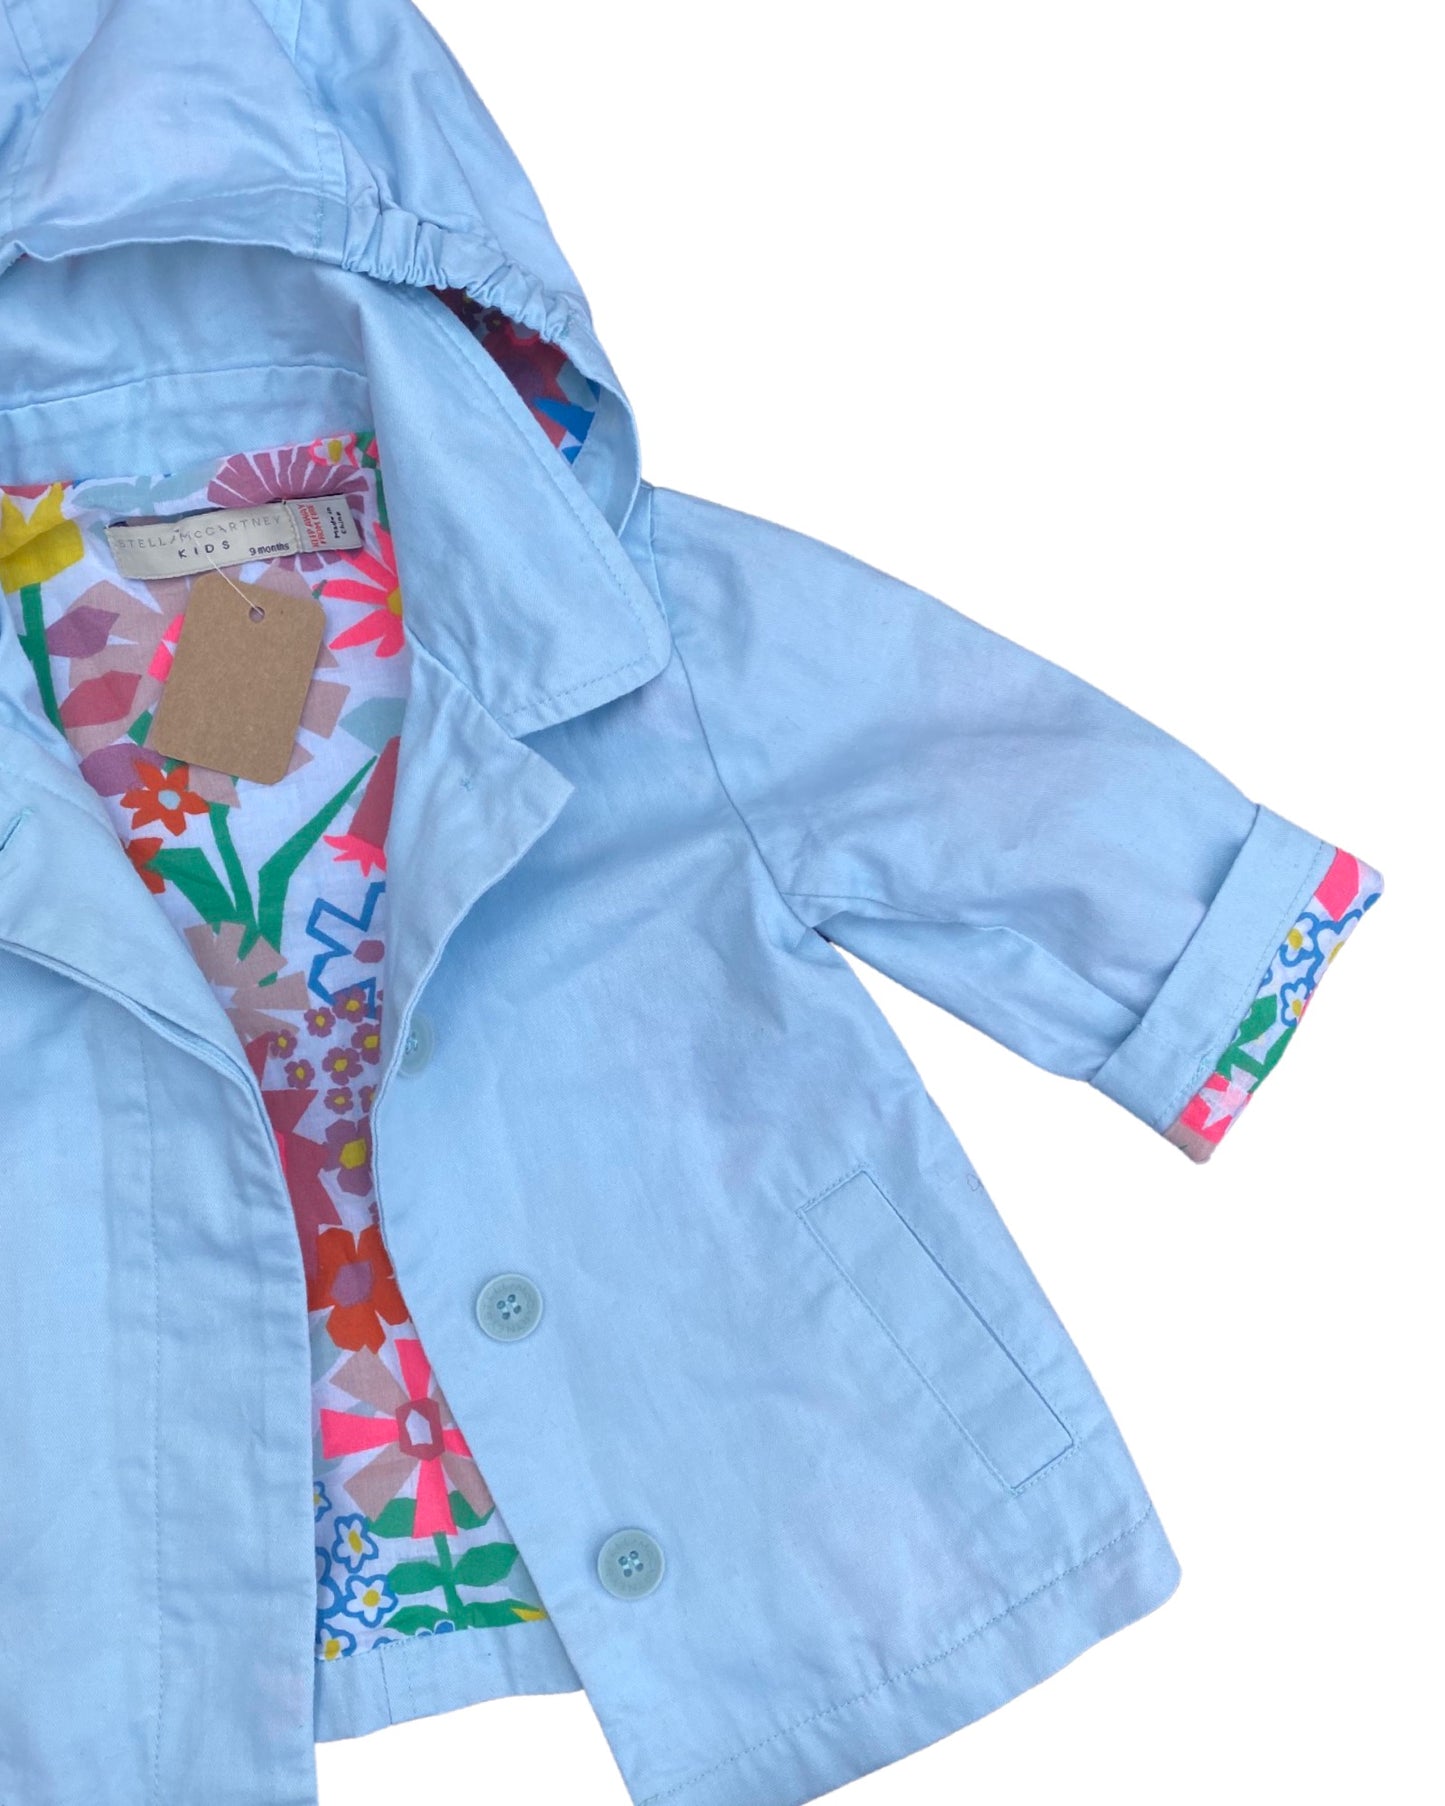 Stella McCartney baby blue lightweight parka jacket with floral lining (6-9mths)